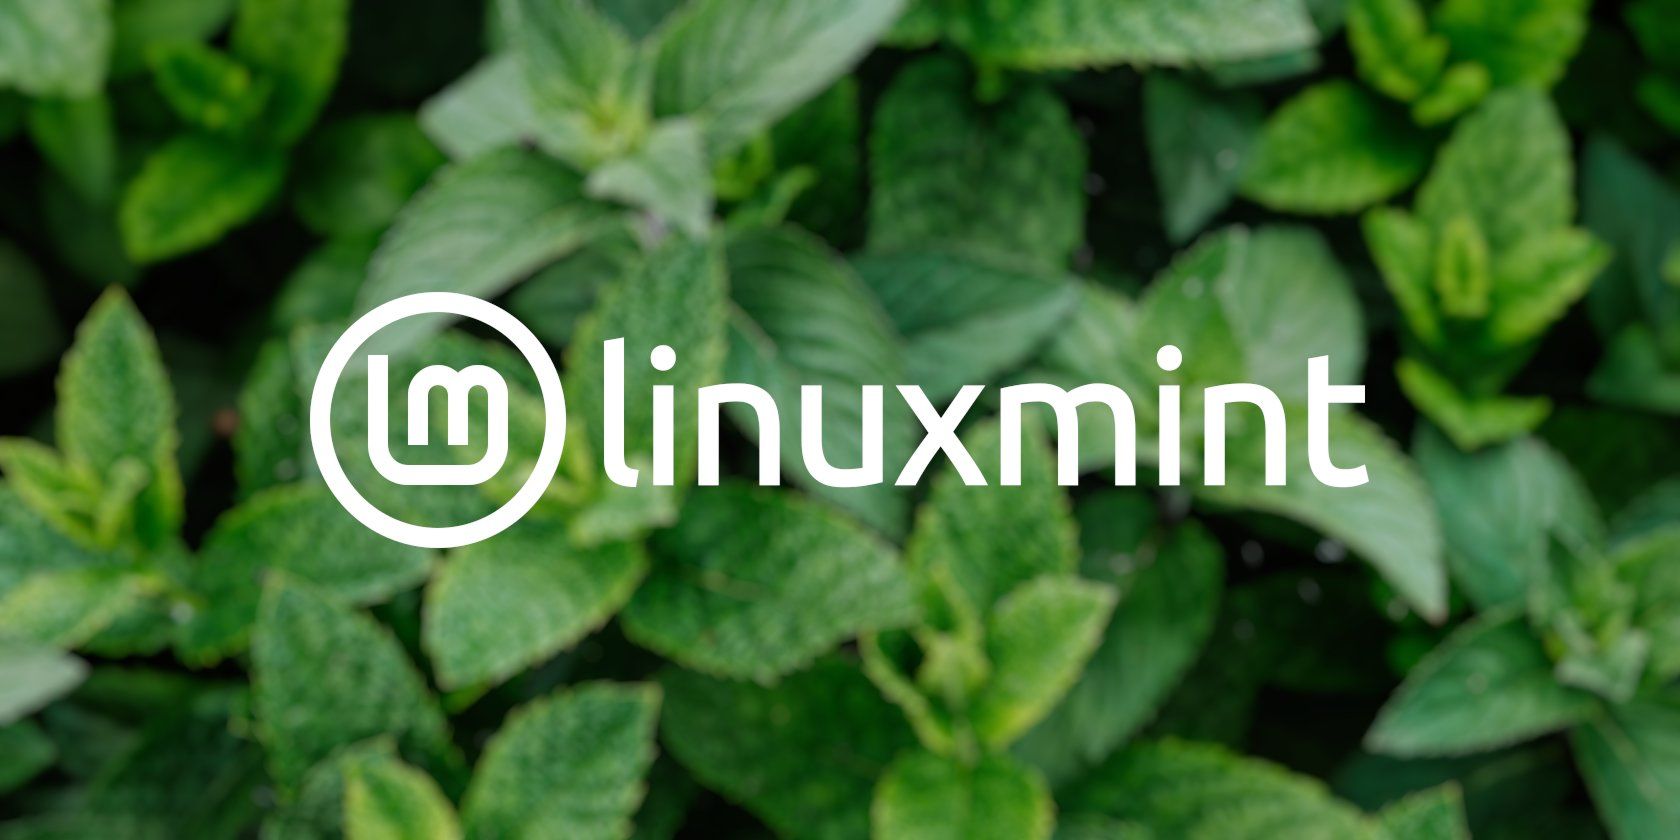 The Linux Mint logo in white with a darkly blurred patch of mint leaves in the background.